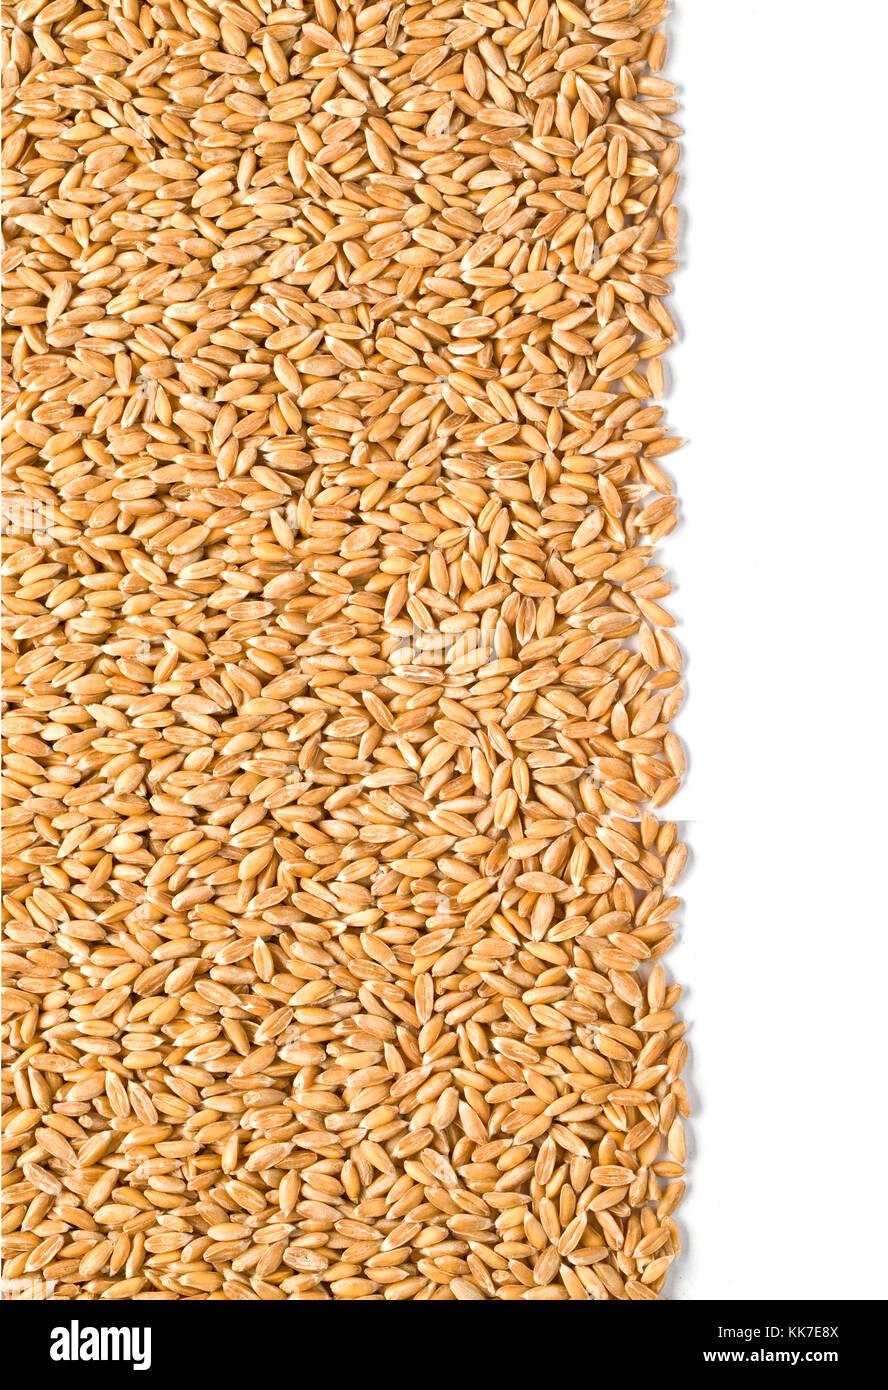 wheat dinkel close-up isolated on white background with clipping path Stock Photo